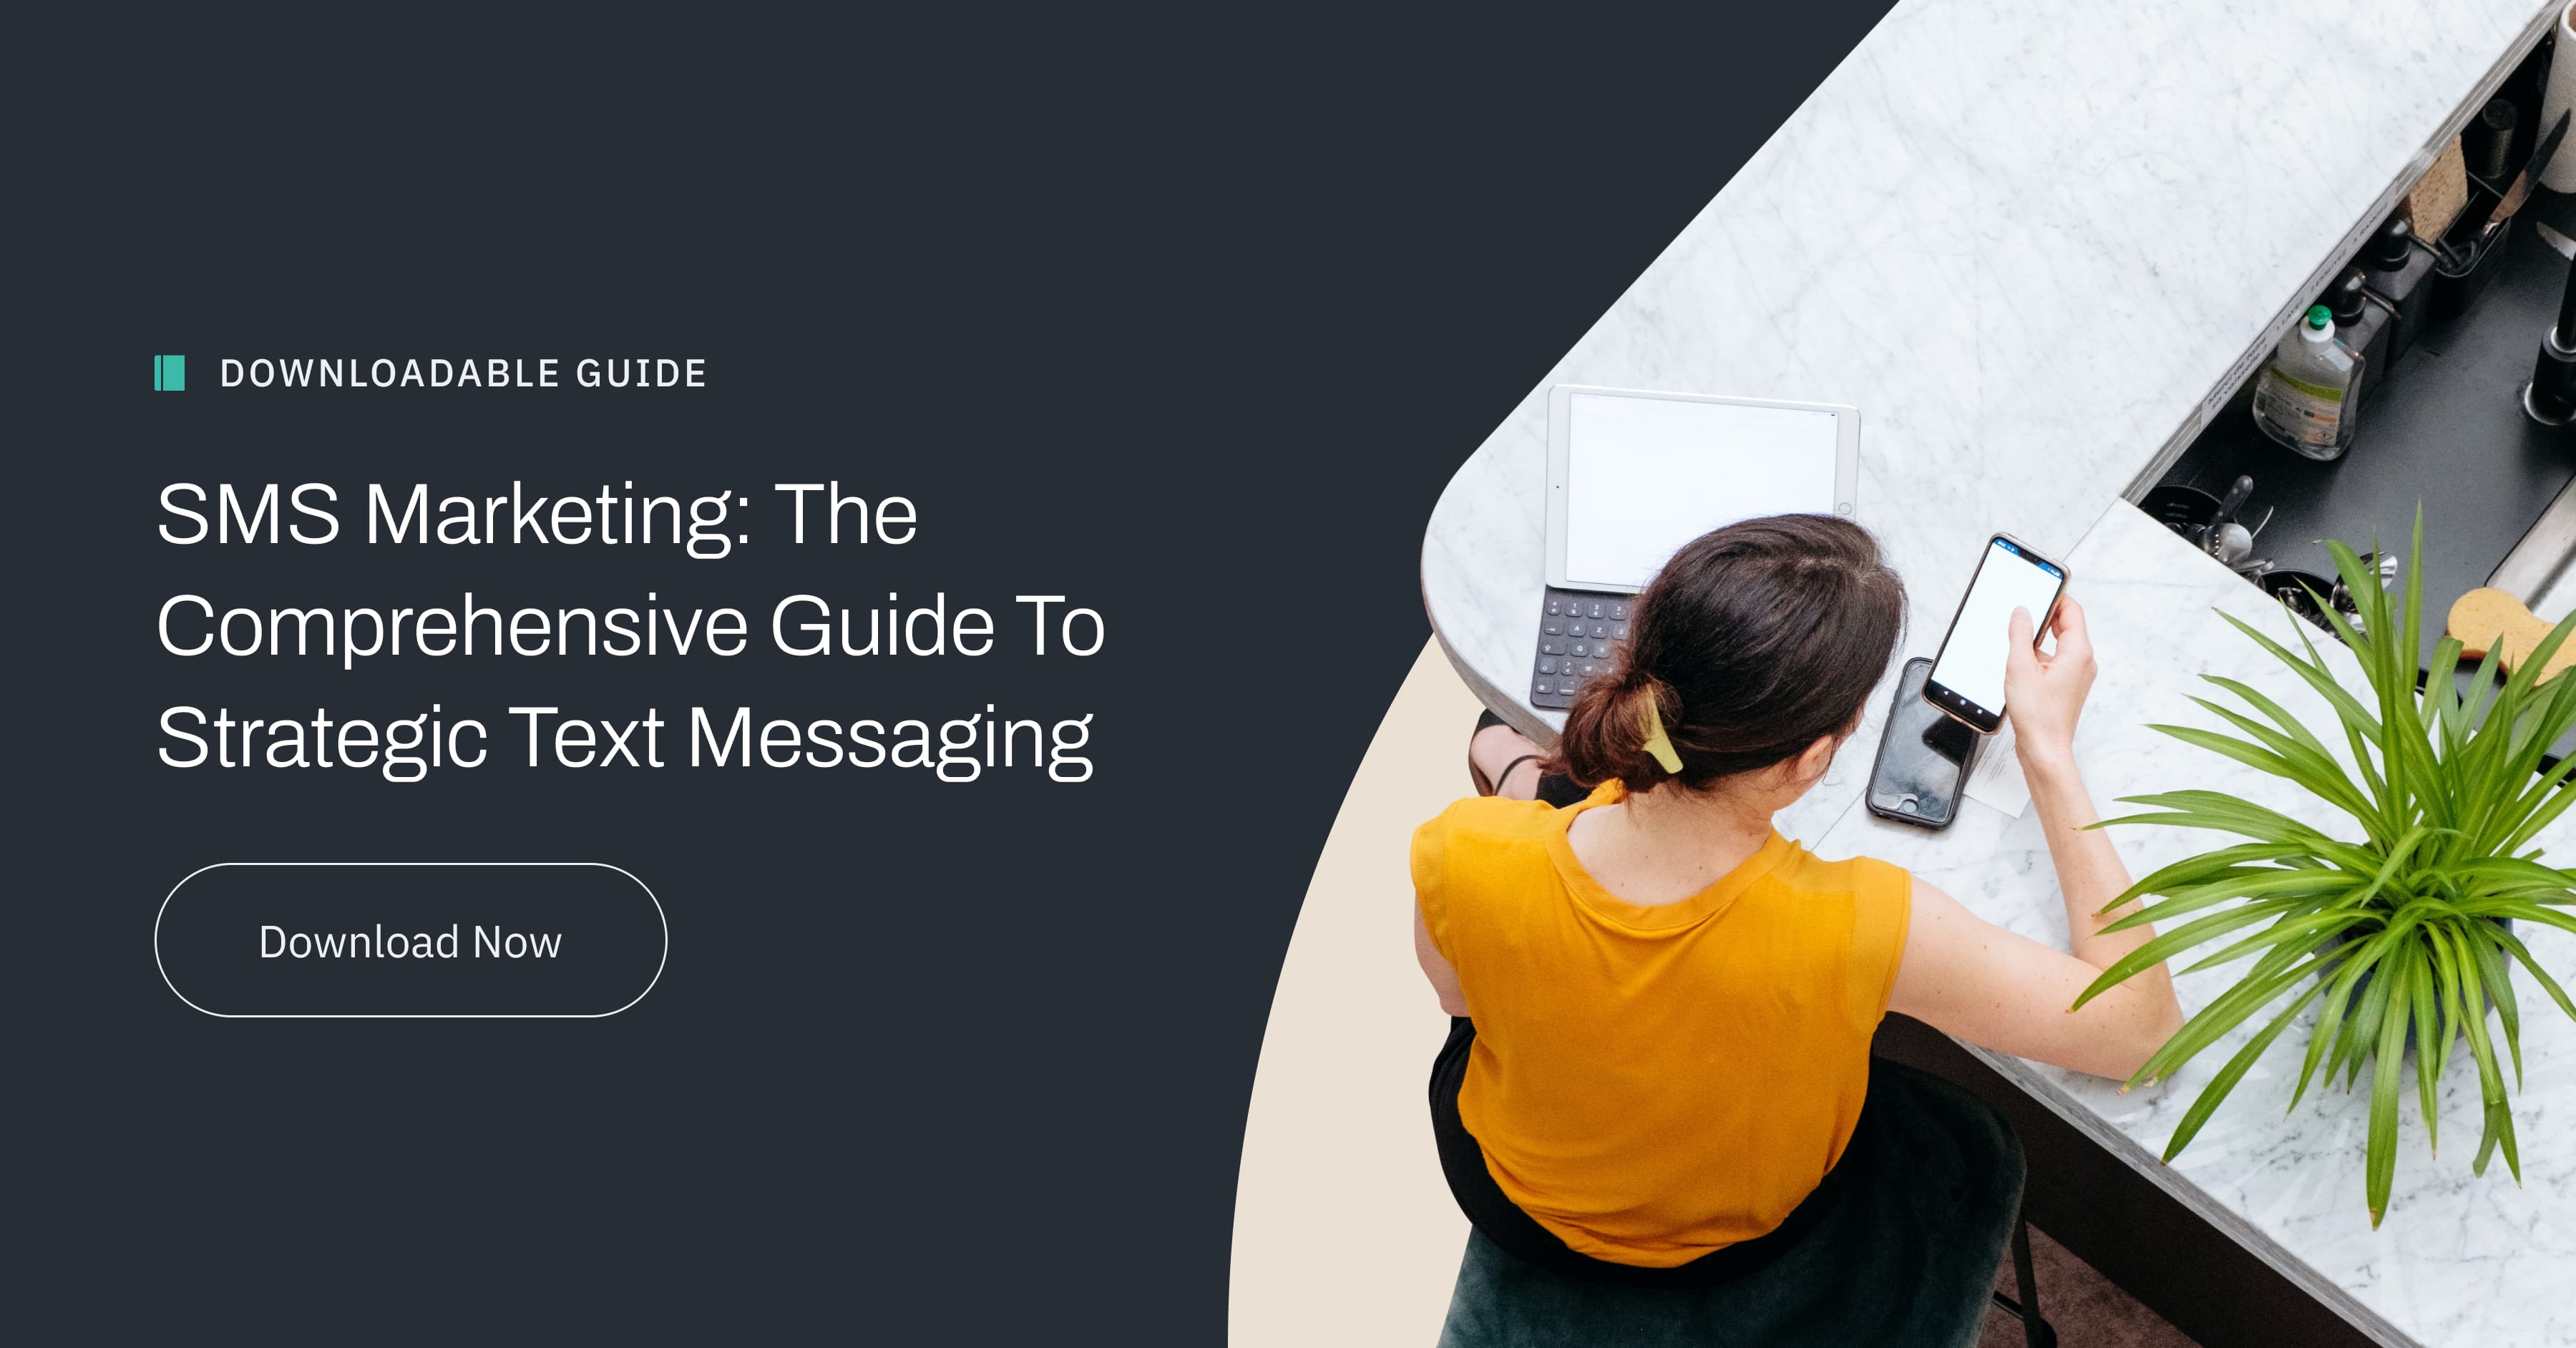 SMS Marketing: The Comprehensive Guide To Strategic Text Messaging